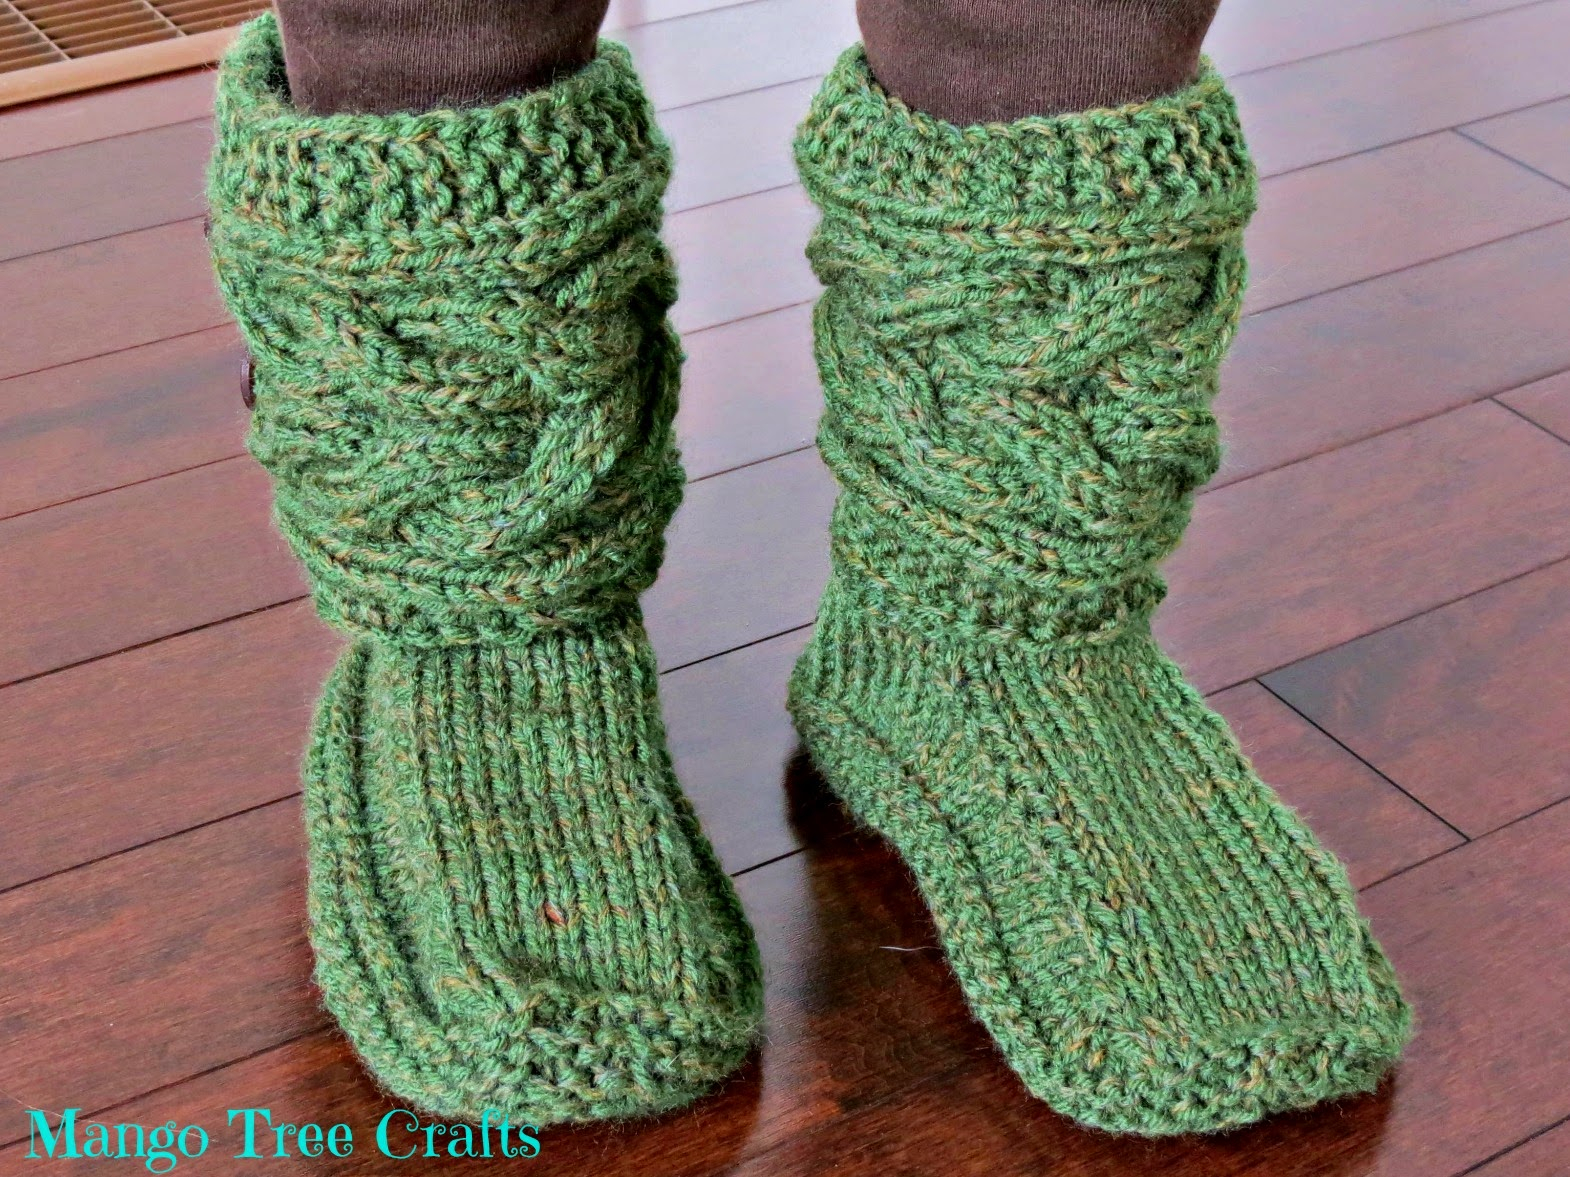 Knitting Patterns For Slipper Boots Knitted Slipper Boots